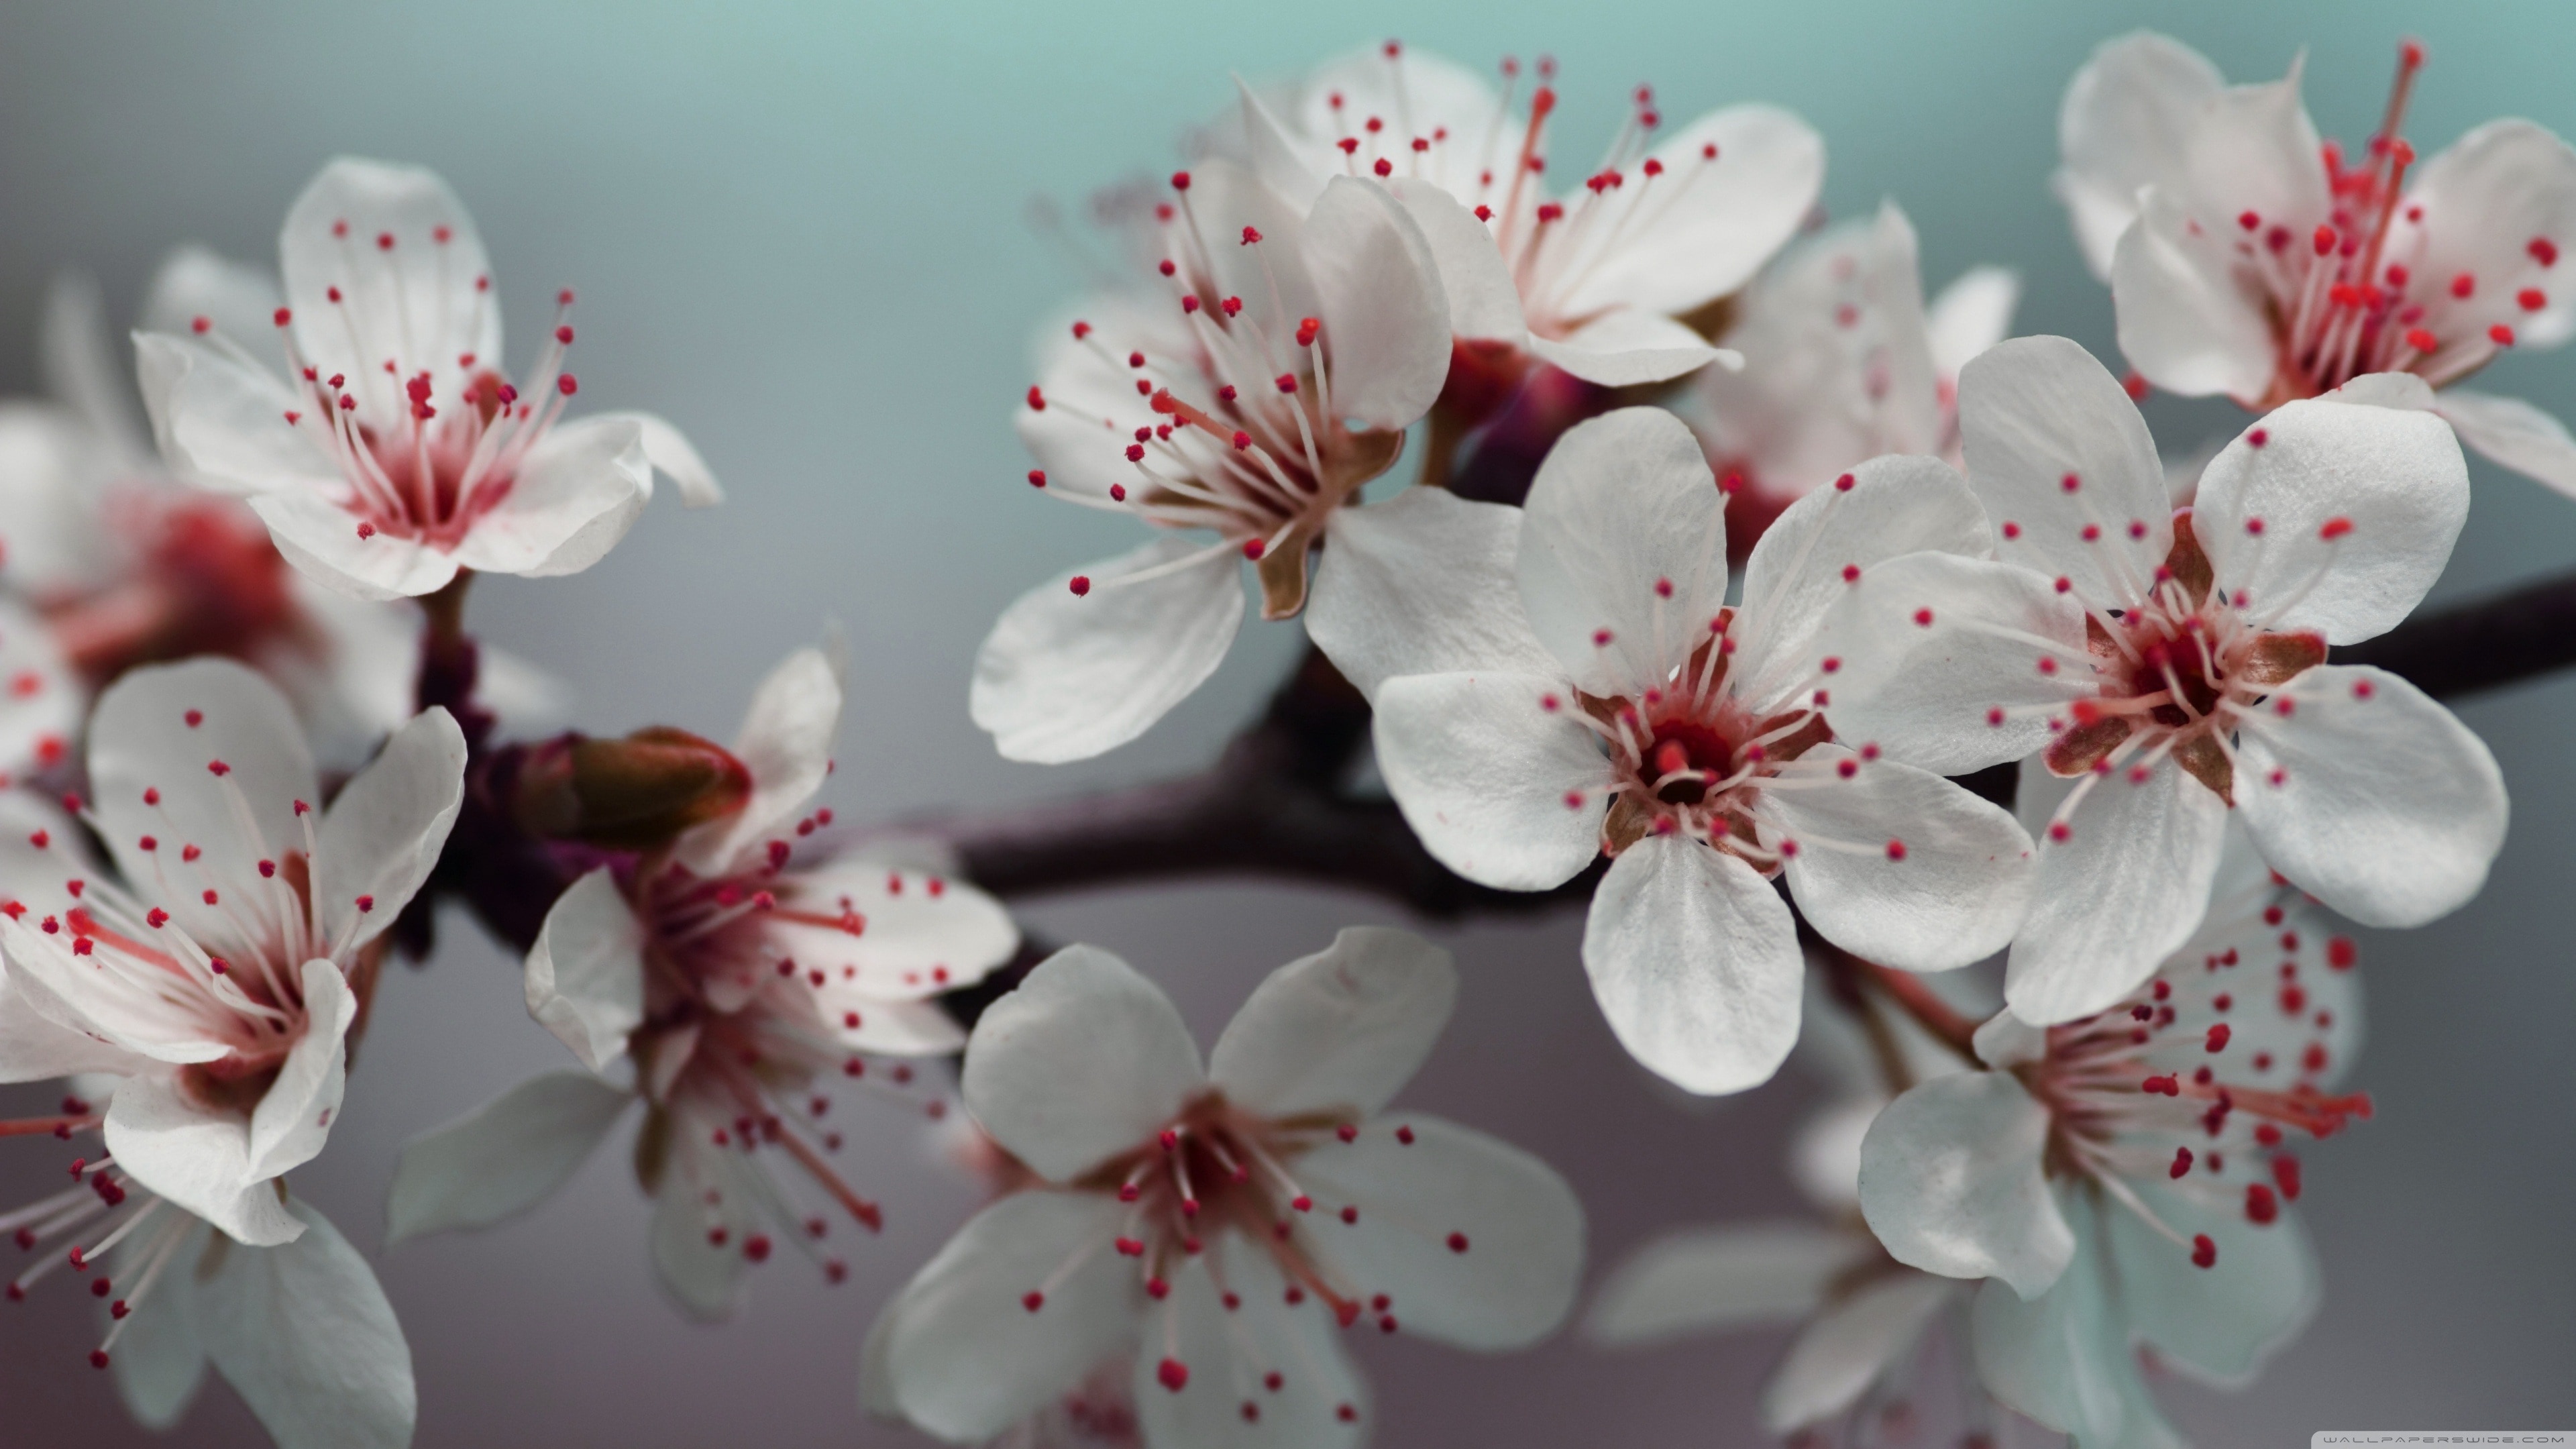 Wallpapers, Photography, Hd, flower, blossom